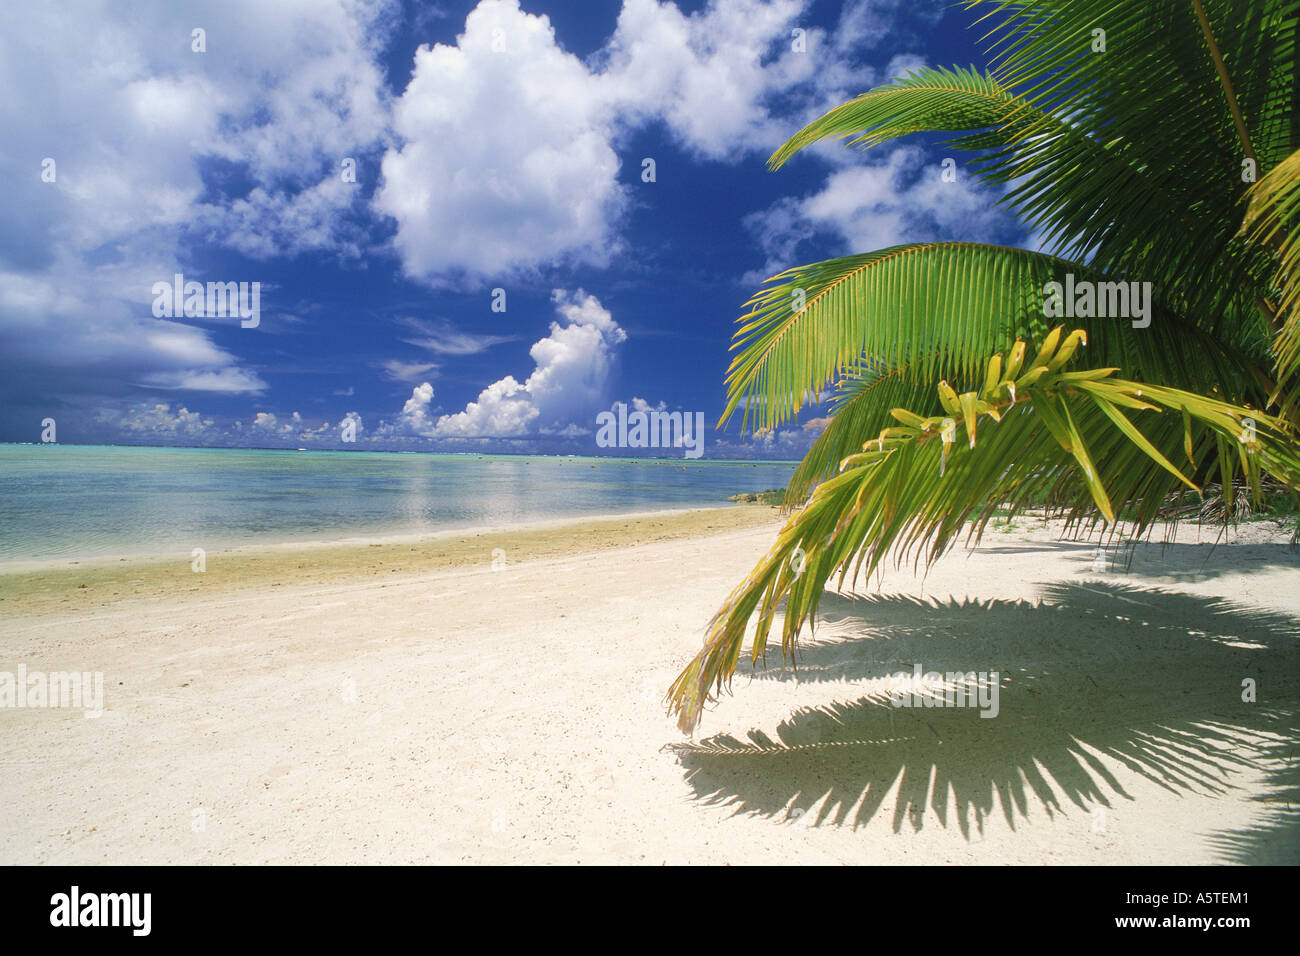 Palm fronds over white sandy shores of Aitutaki Island in Cook Islands South Pacific Stock Photo